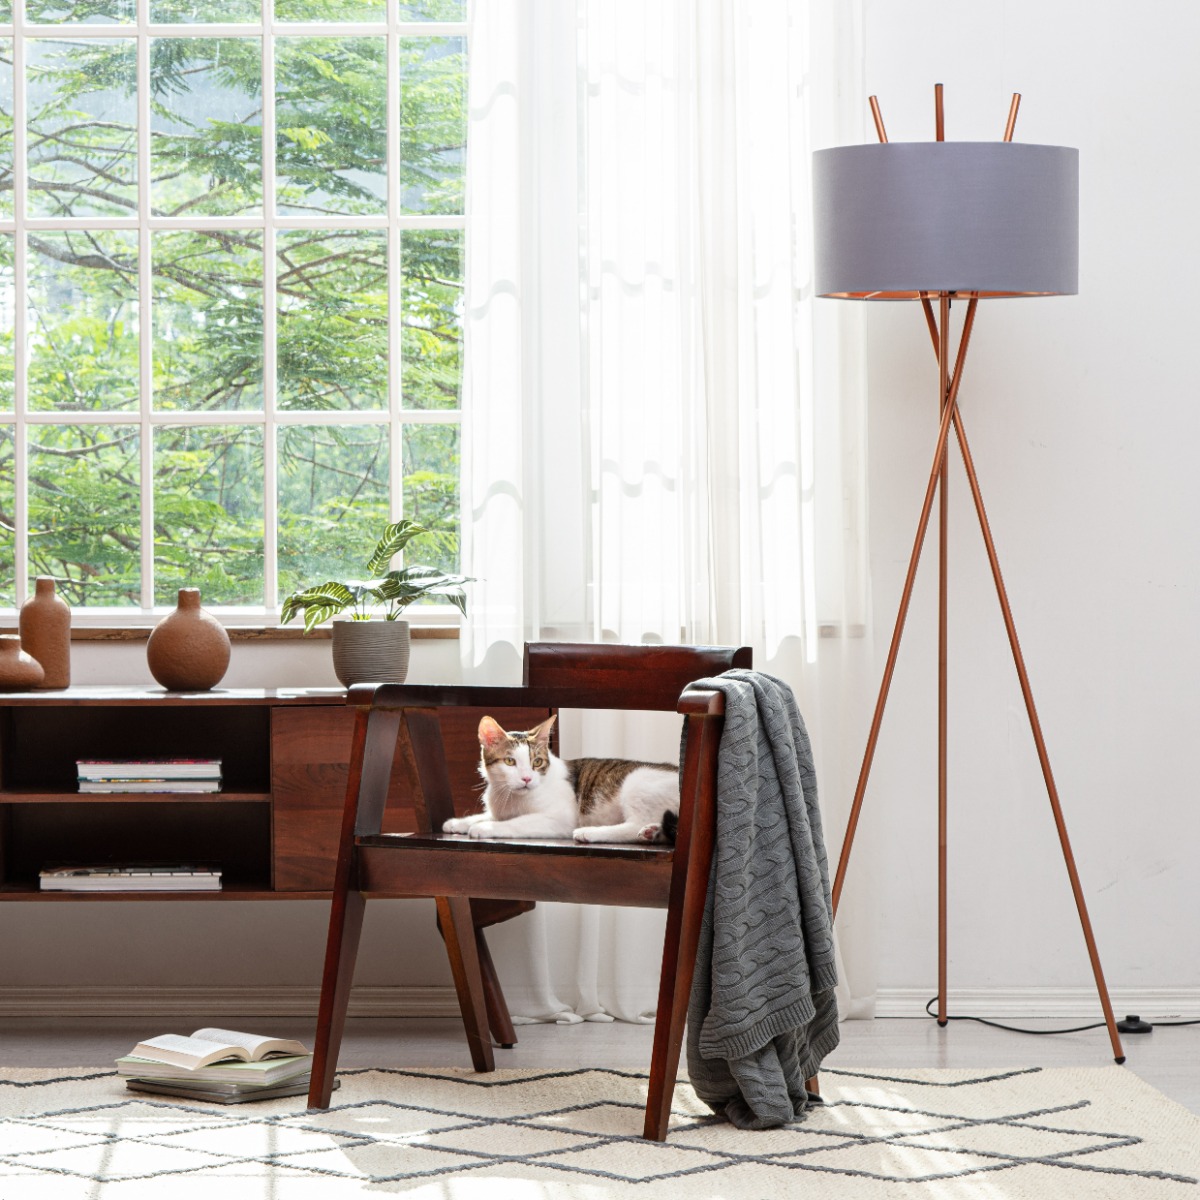 Crawford Copper Tripod Floor Lamp with XL Grey and Copper Reni Shade